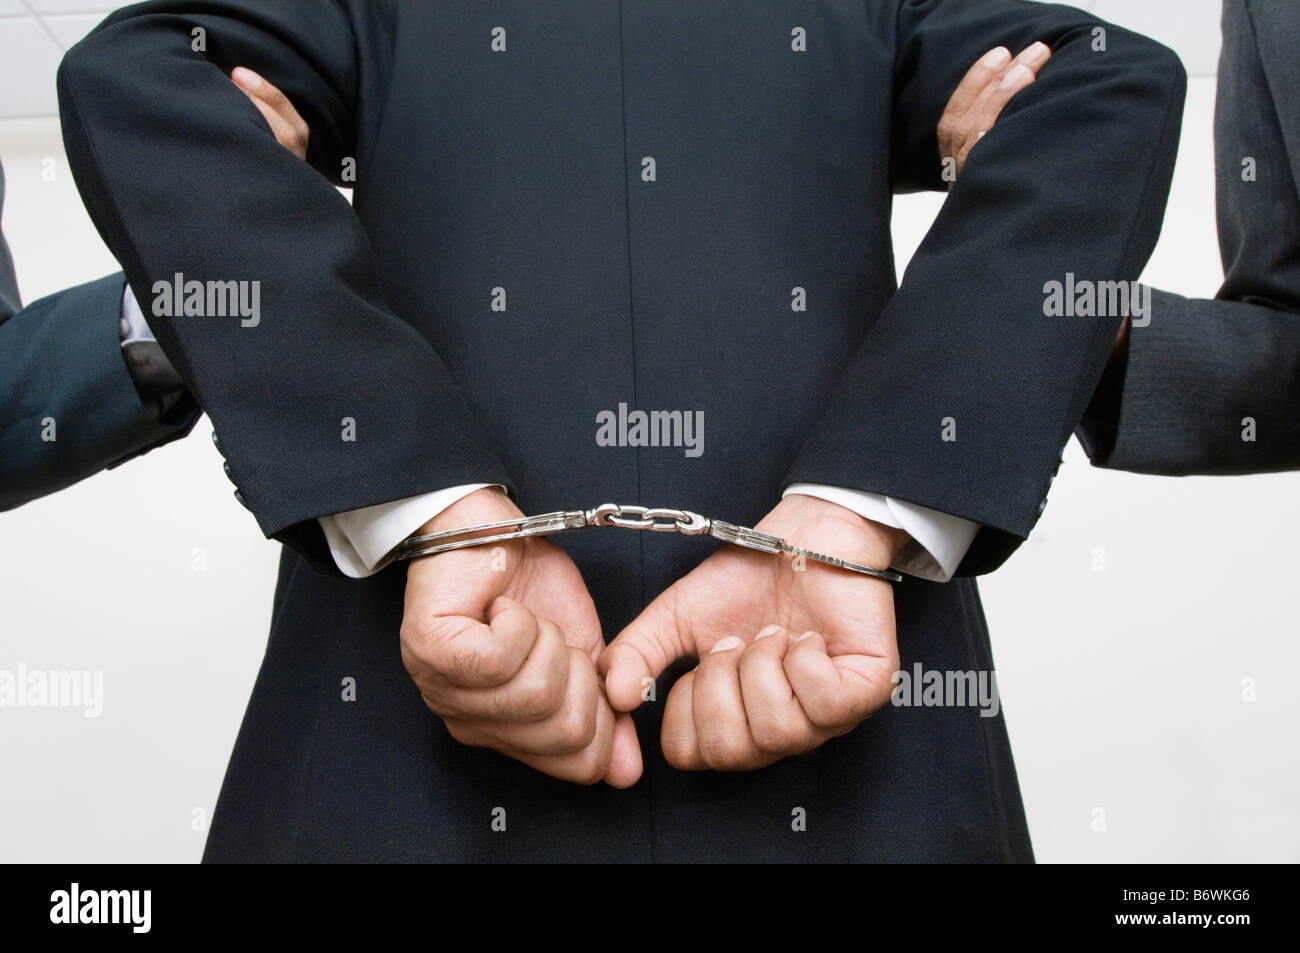 Businessman Being Arrested Stock Photo